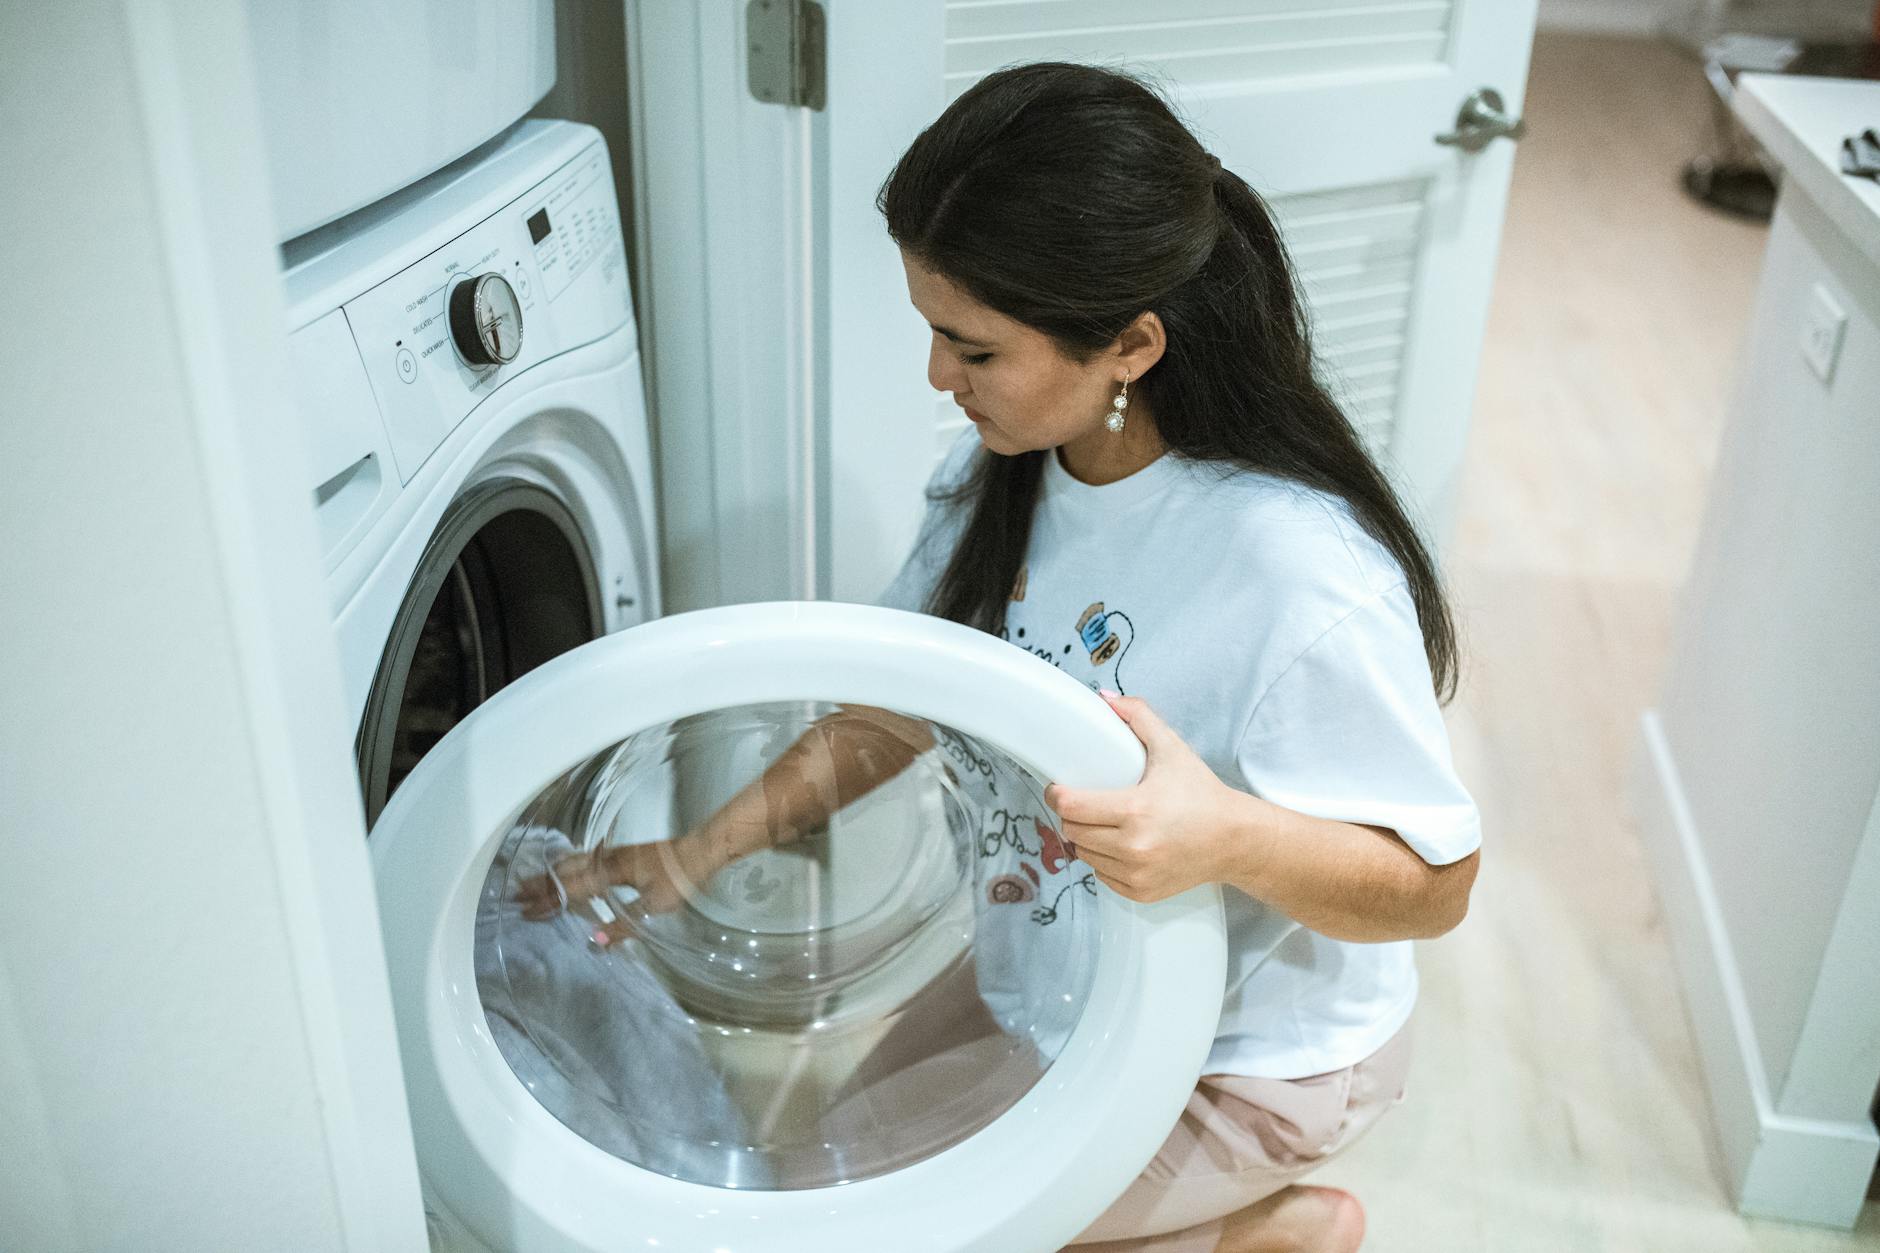 a lady adding clothes in washing machine